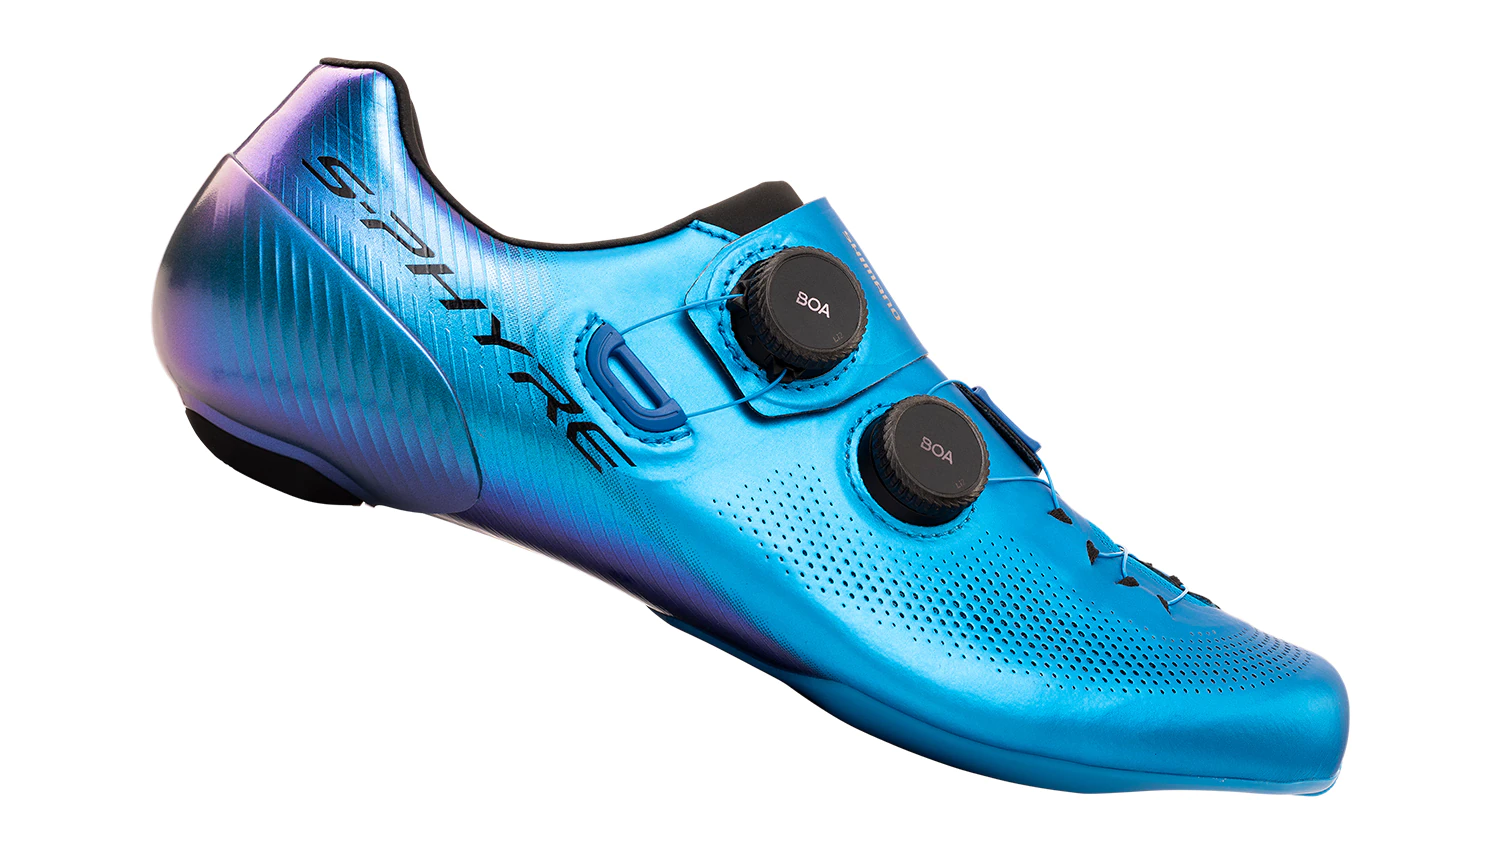 Elevate your performance with the shimano rc903 s-phyre road racing shoe, designed for ultimate power and comfort.